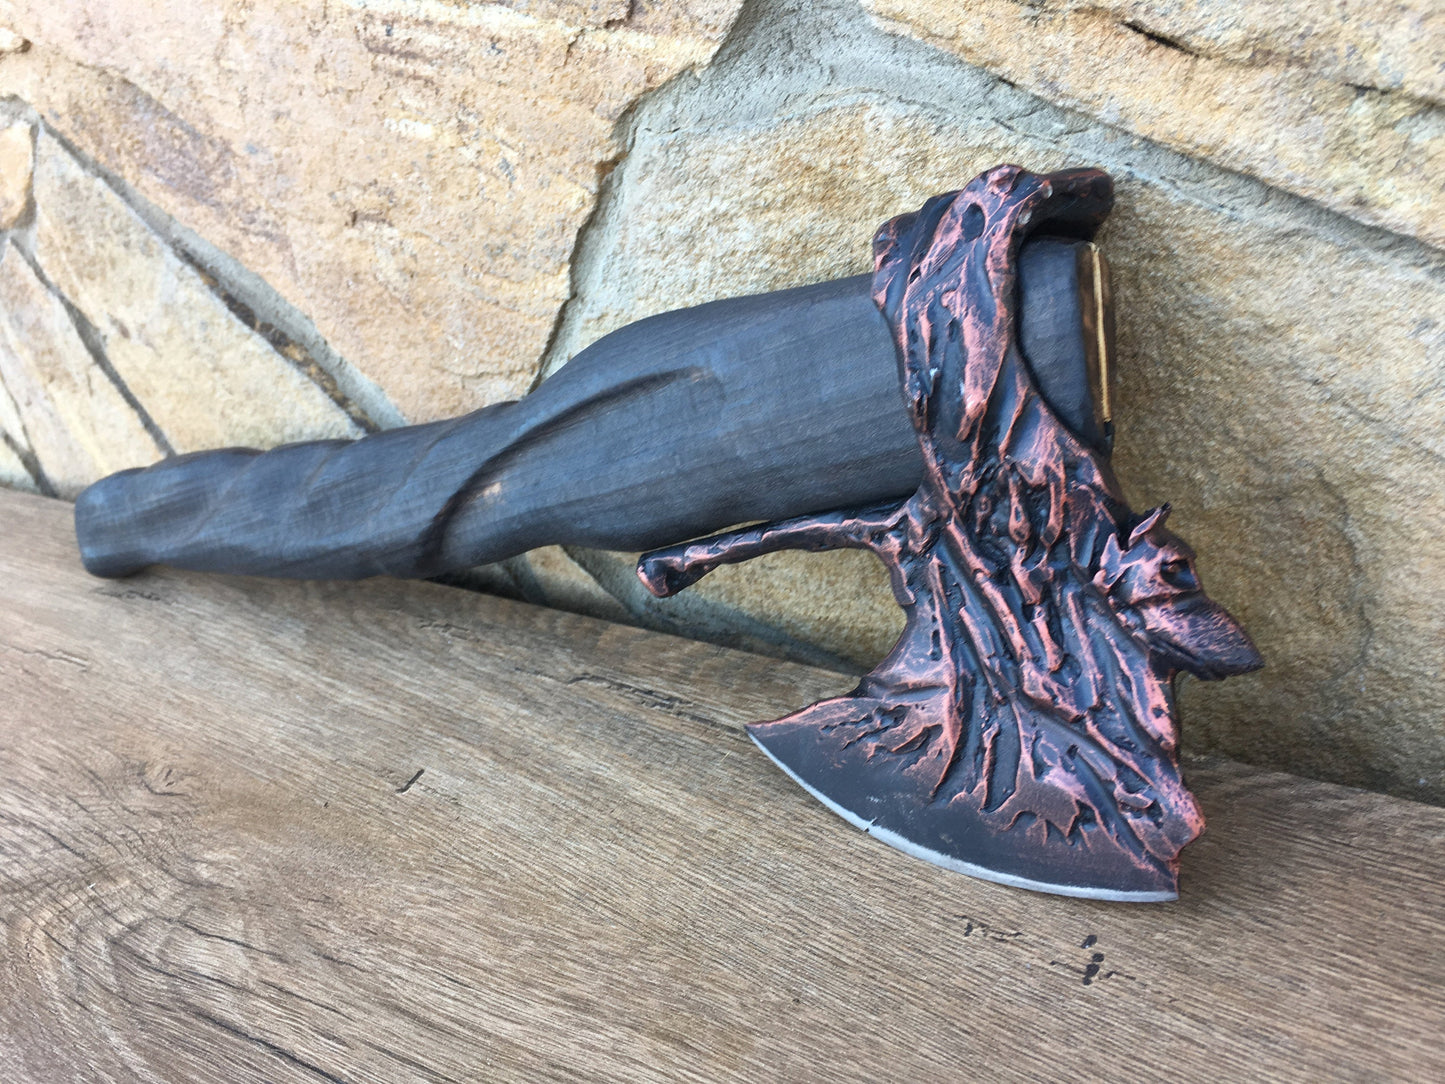 Stress relief, 11th anniversary gift, mens gift, 6th anniversary gift, groomsmen gifts, viking axe, hatchet, christmas gift, wolf gifts, axe